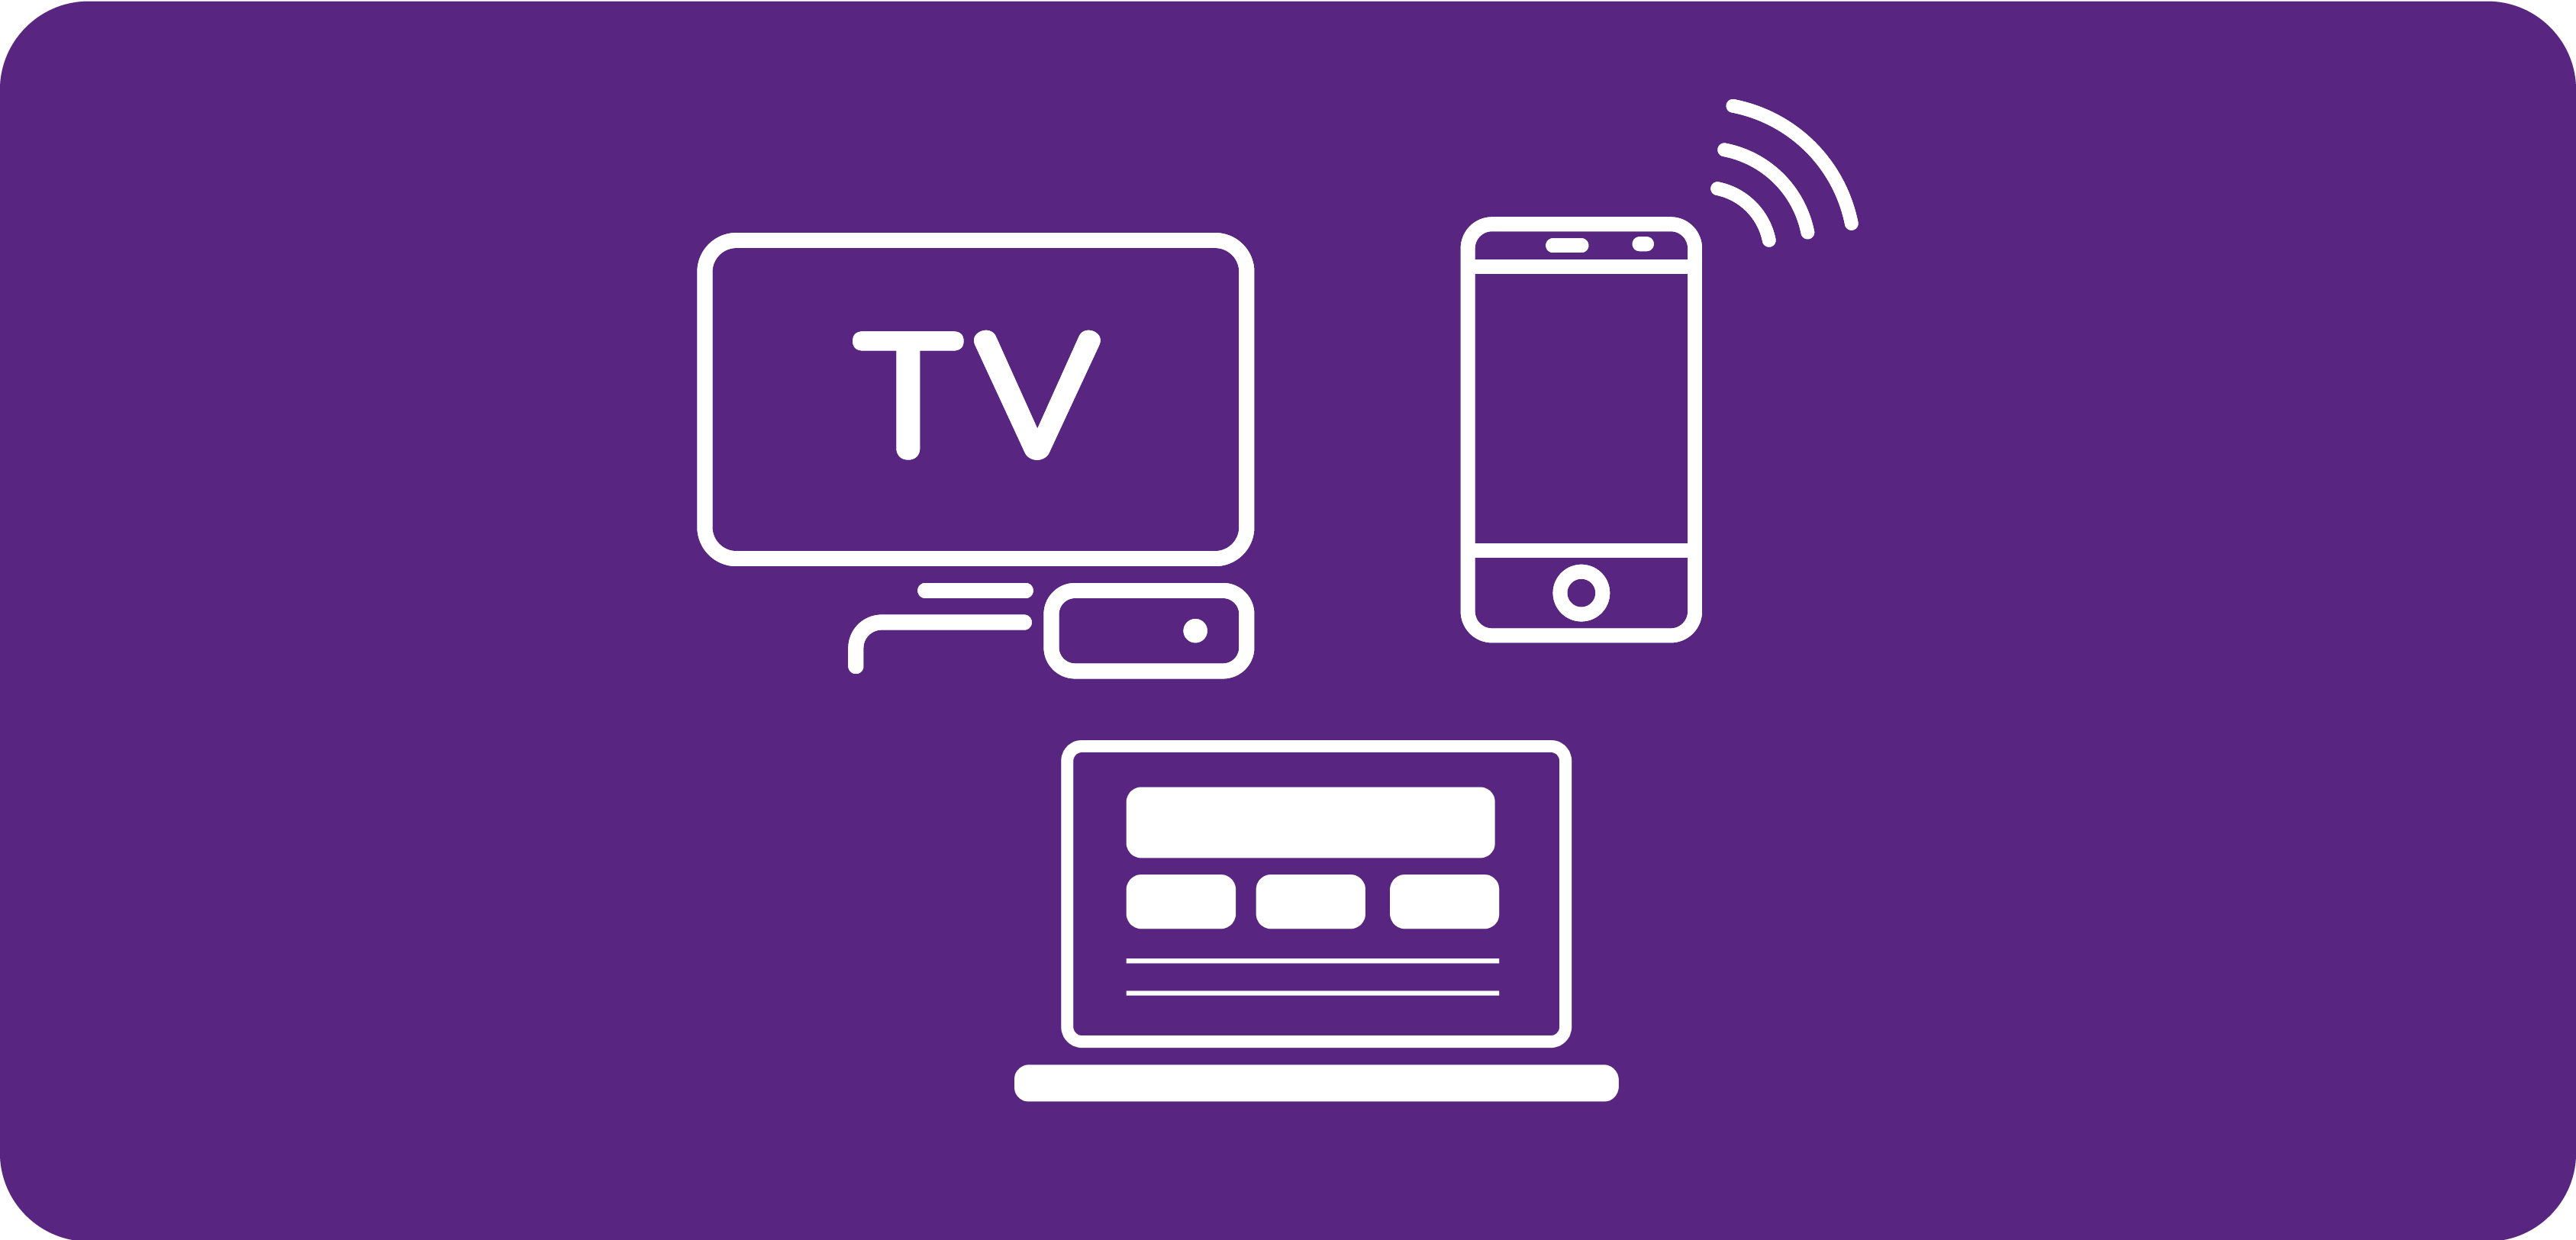 Link to Markets and Competition. White TV, mobile and laptop icons on purple background